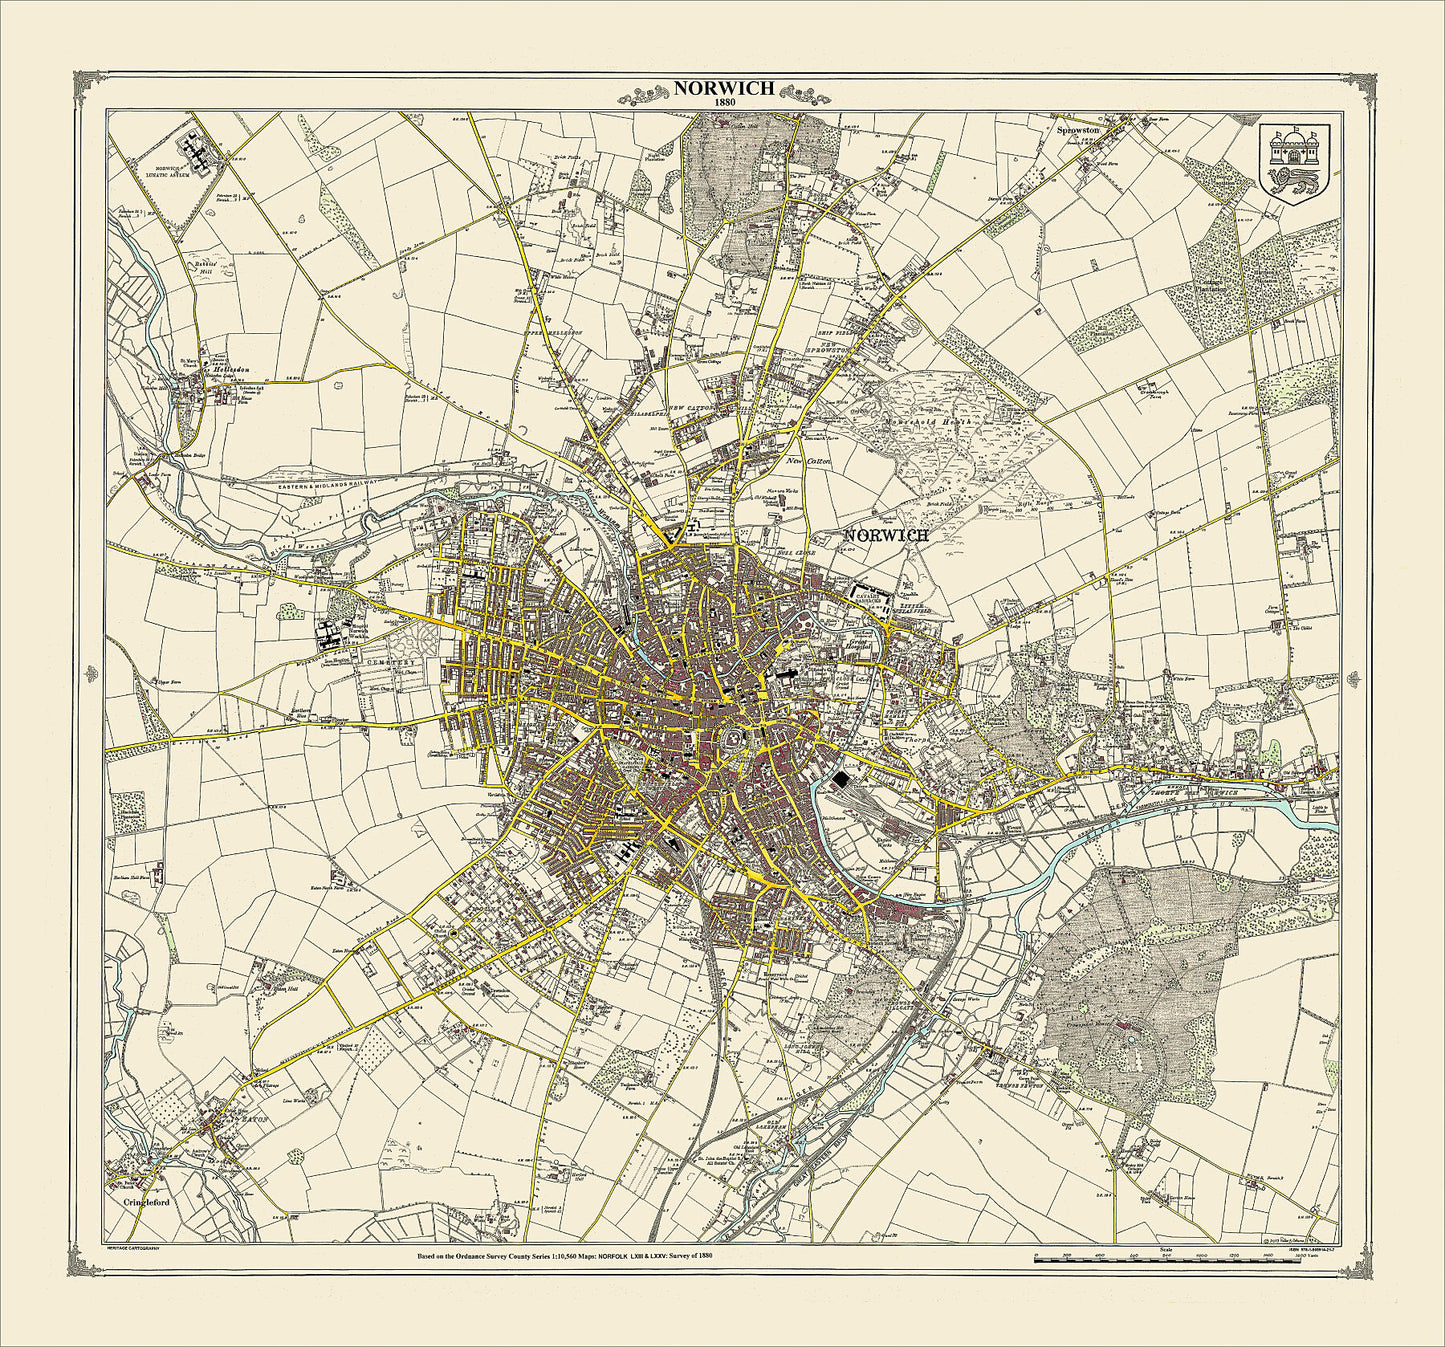 Coloured Victorian map of Norwich in 1880 by Peter J Adams of Heritage Cartography